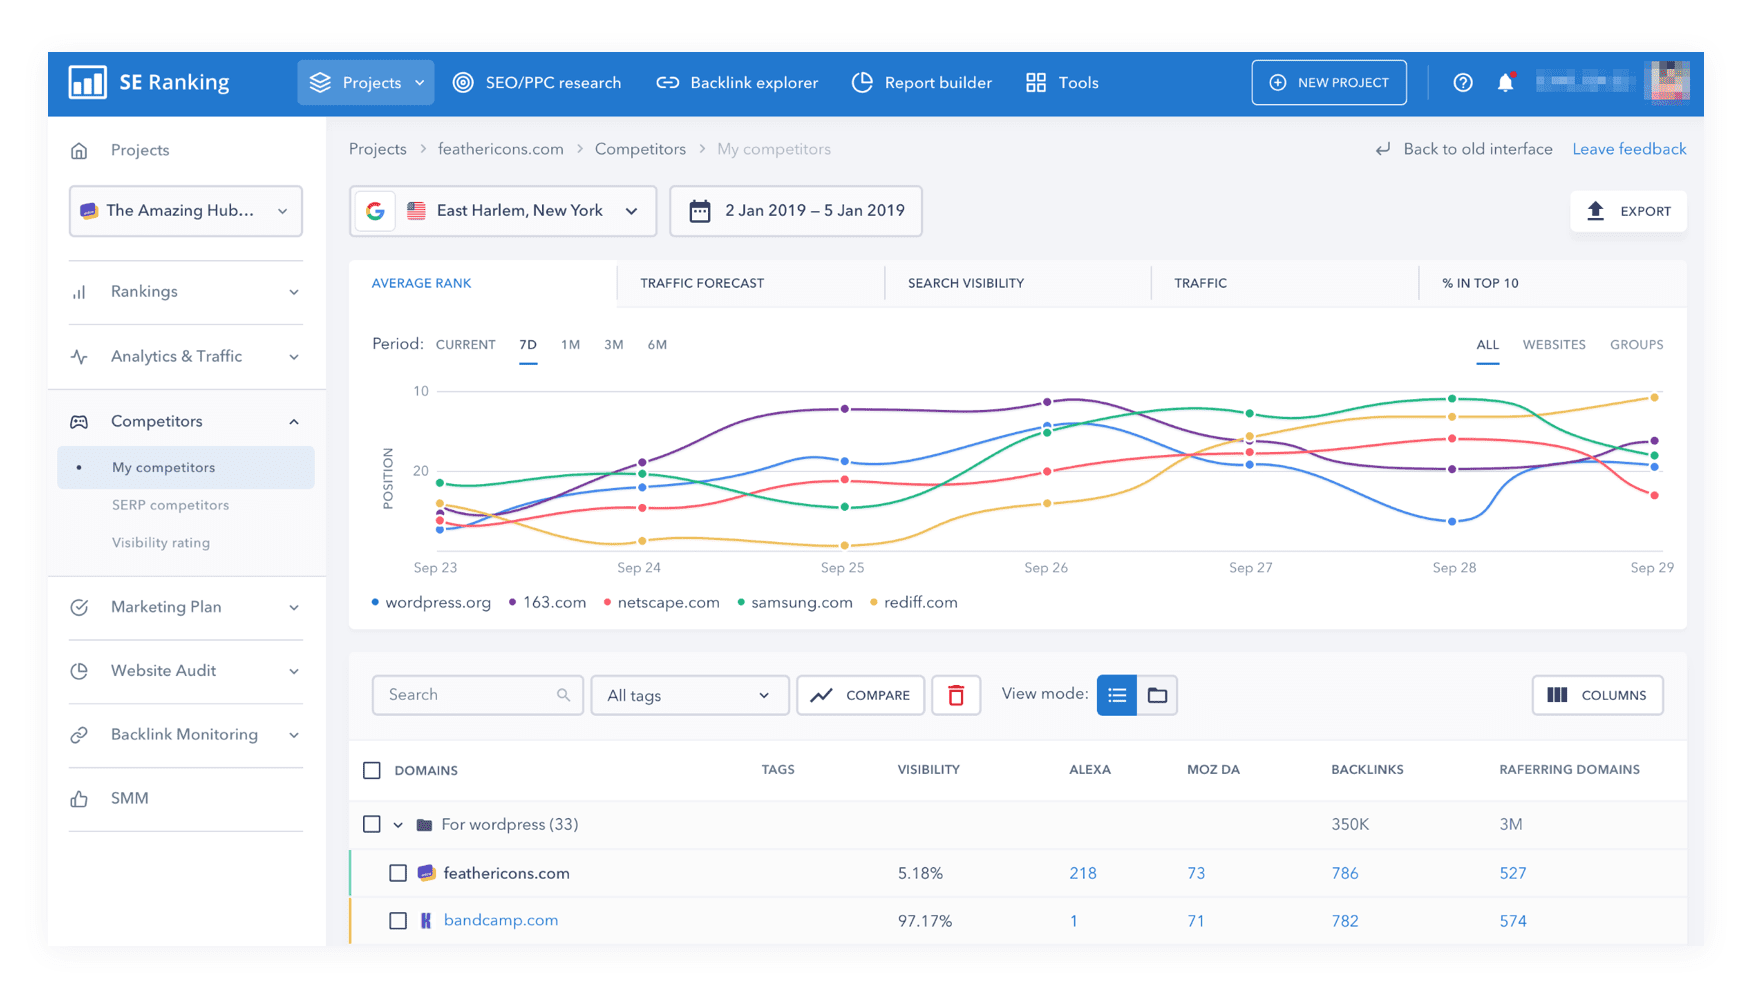 SE Ranking's new design of the Competitor section